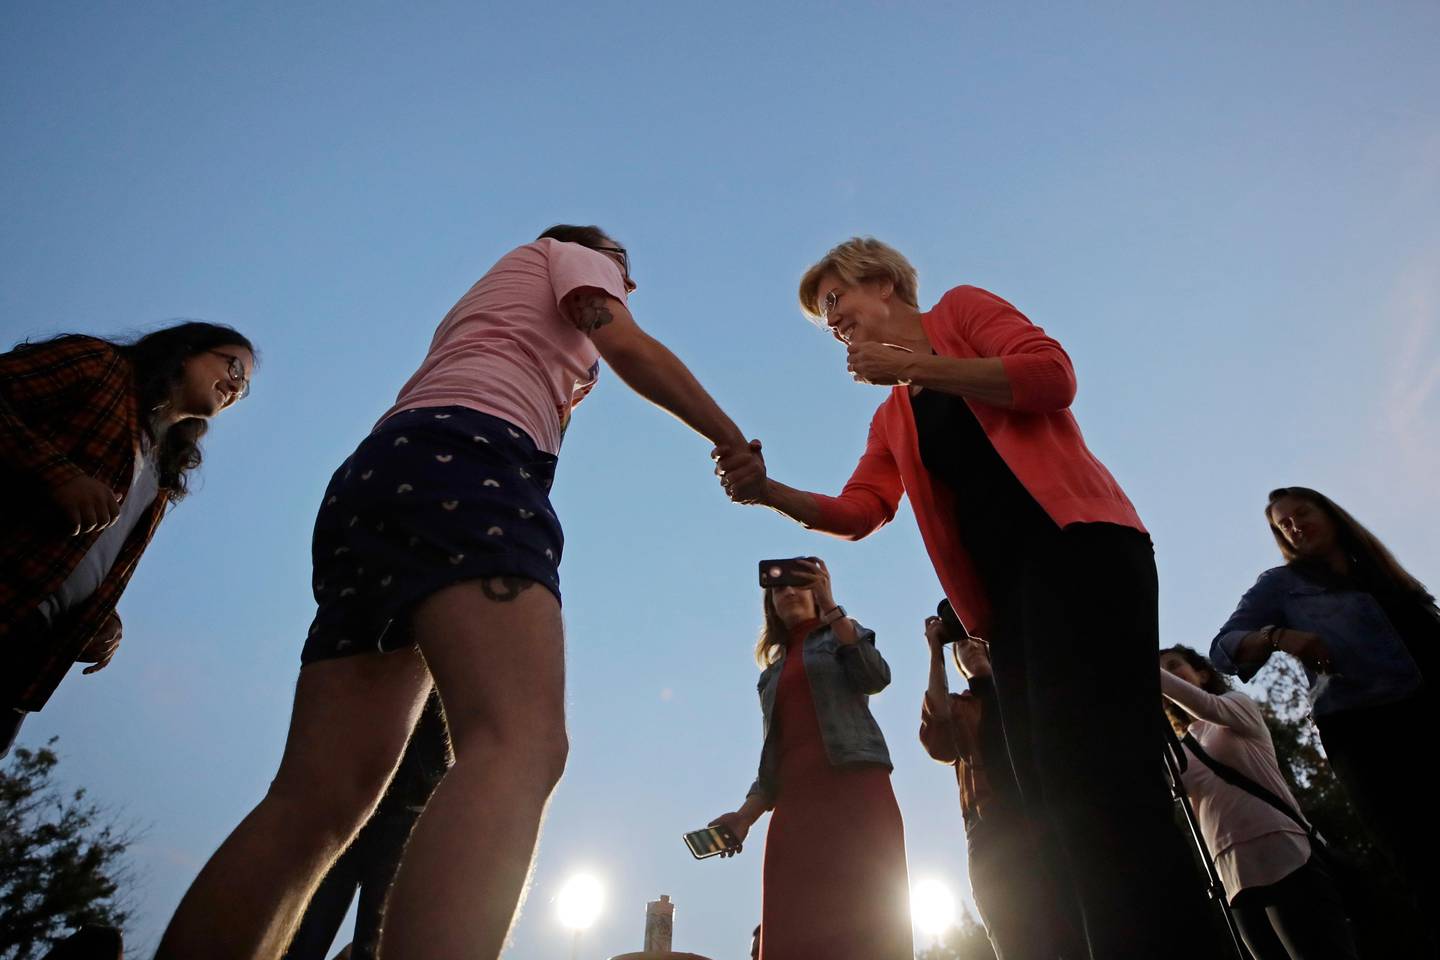 Democratic presidential candidate Sen. Elizabeth Warren, D-Mass., right, shakes during a "selfie line" at a campaign event, Wednesday, Sept. 25, 2019, in Keene, N.H. (AP Photo/Elise Amendola)